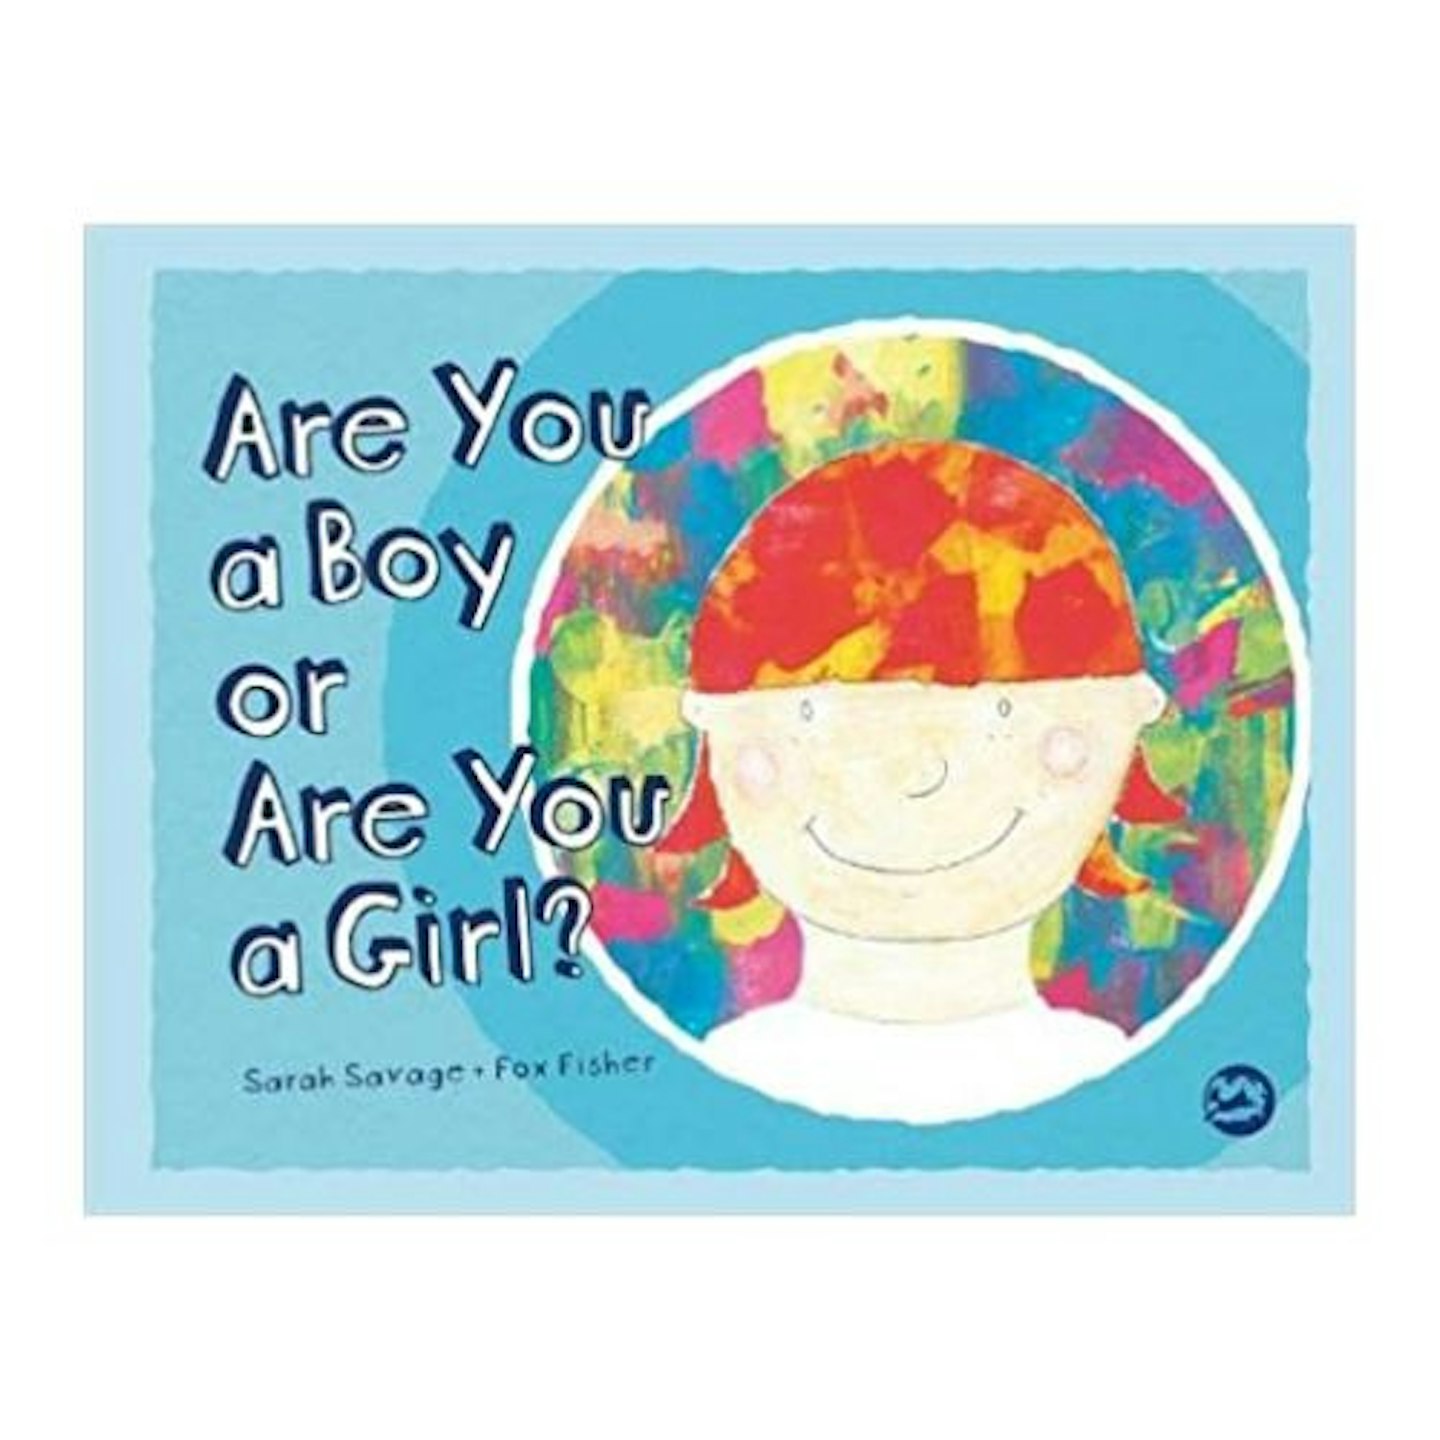 Are You a Boy or Are You a Girl? by Sarah Savage & Fox Fisher